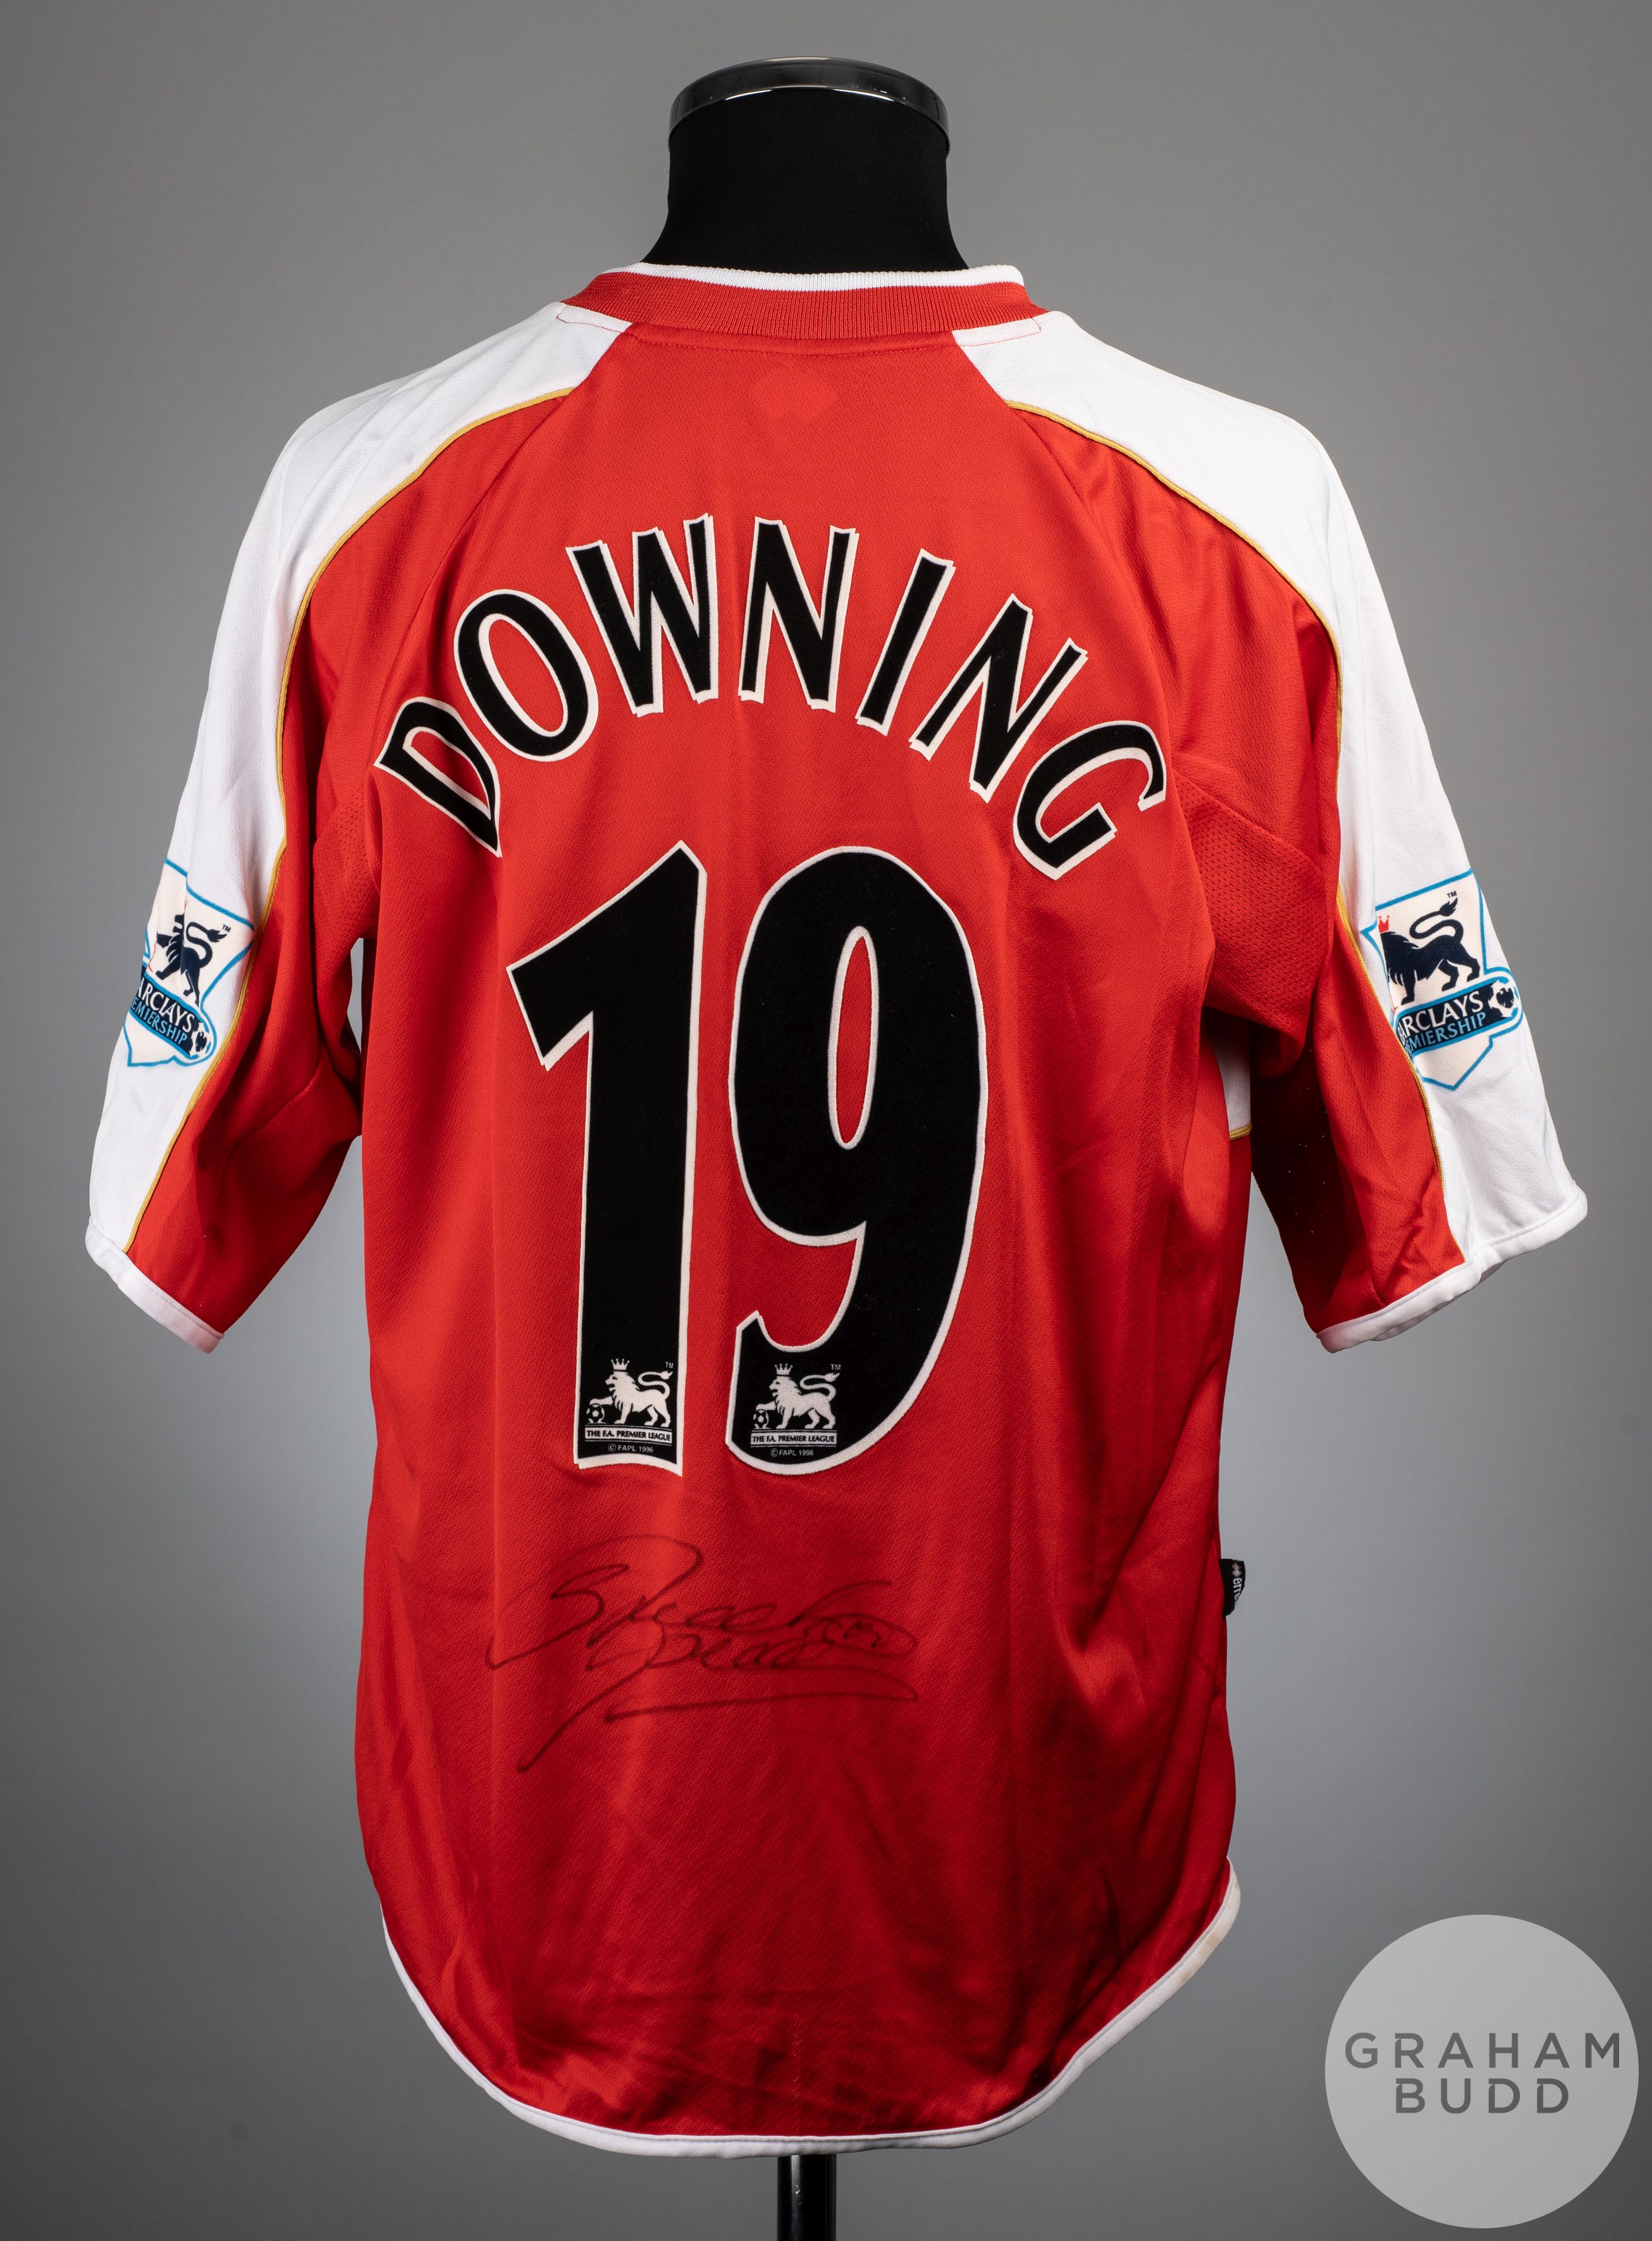 Stewart Downing signed red and white No.19 Middlesbrough match worn long-sleeved shirt, 2006-07 - Bild 2 aus 2